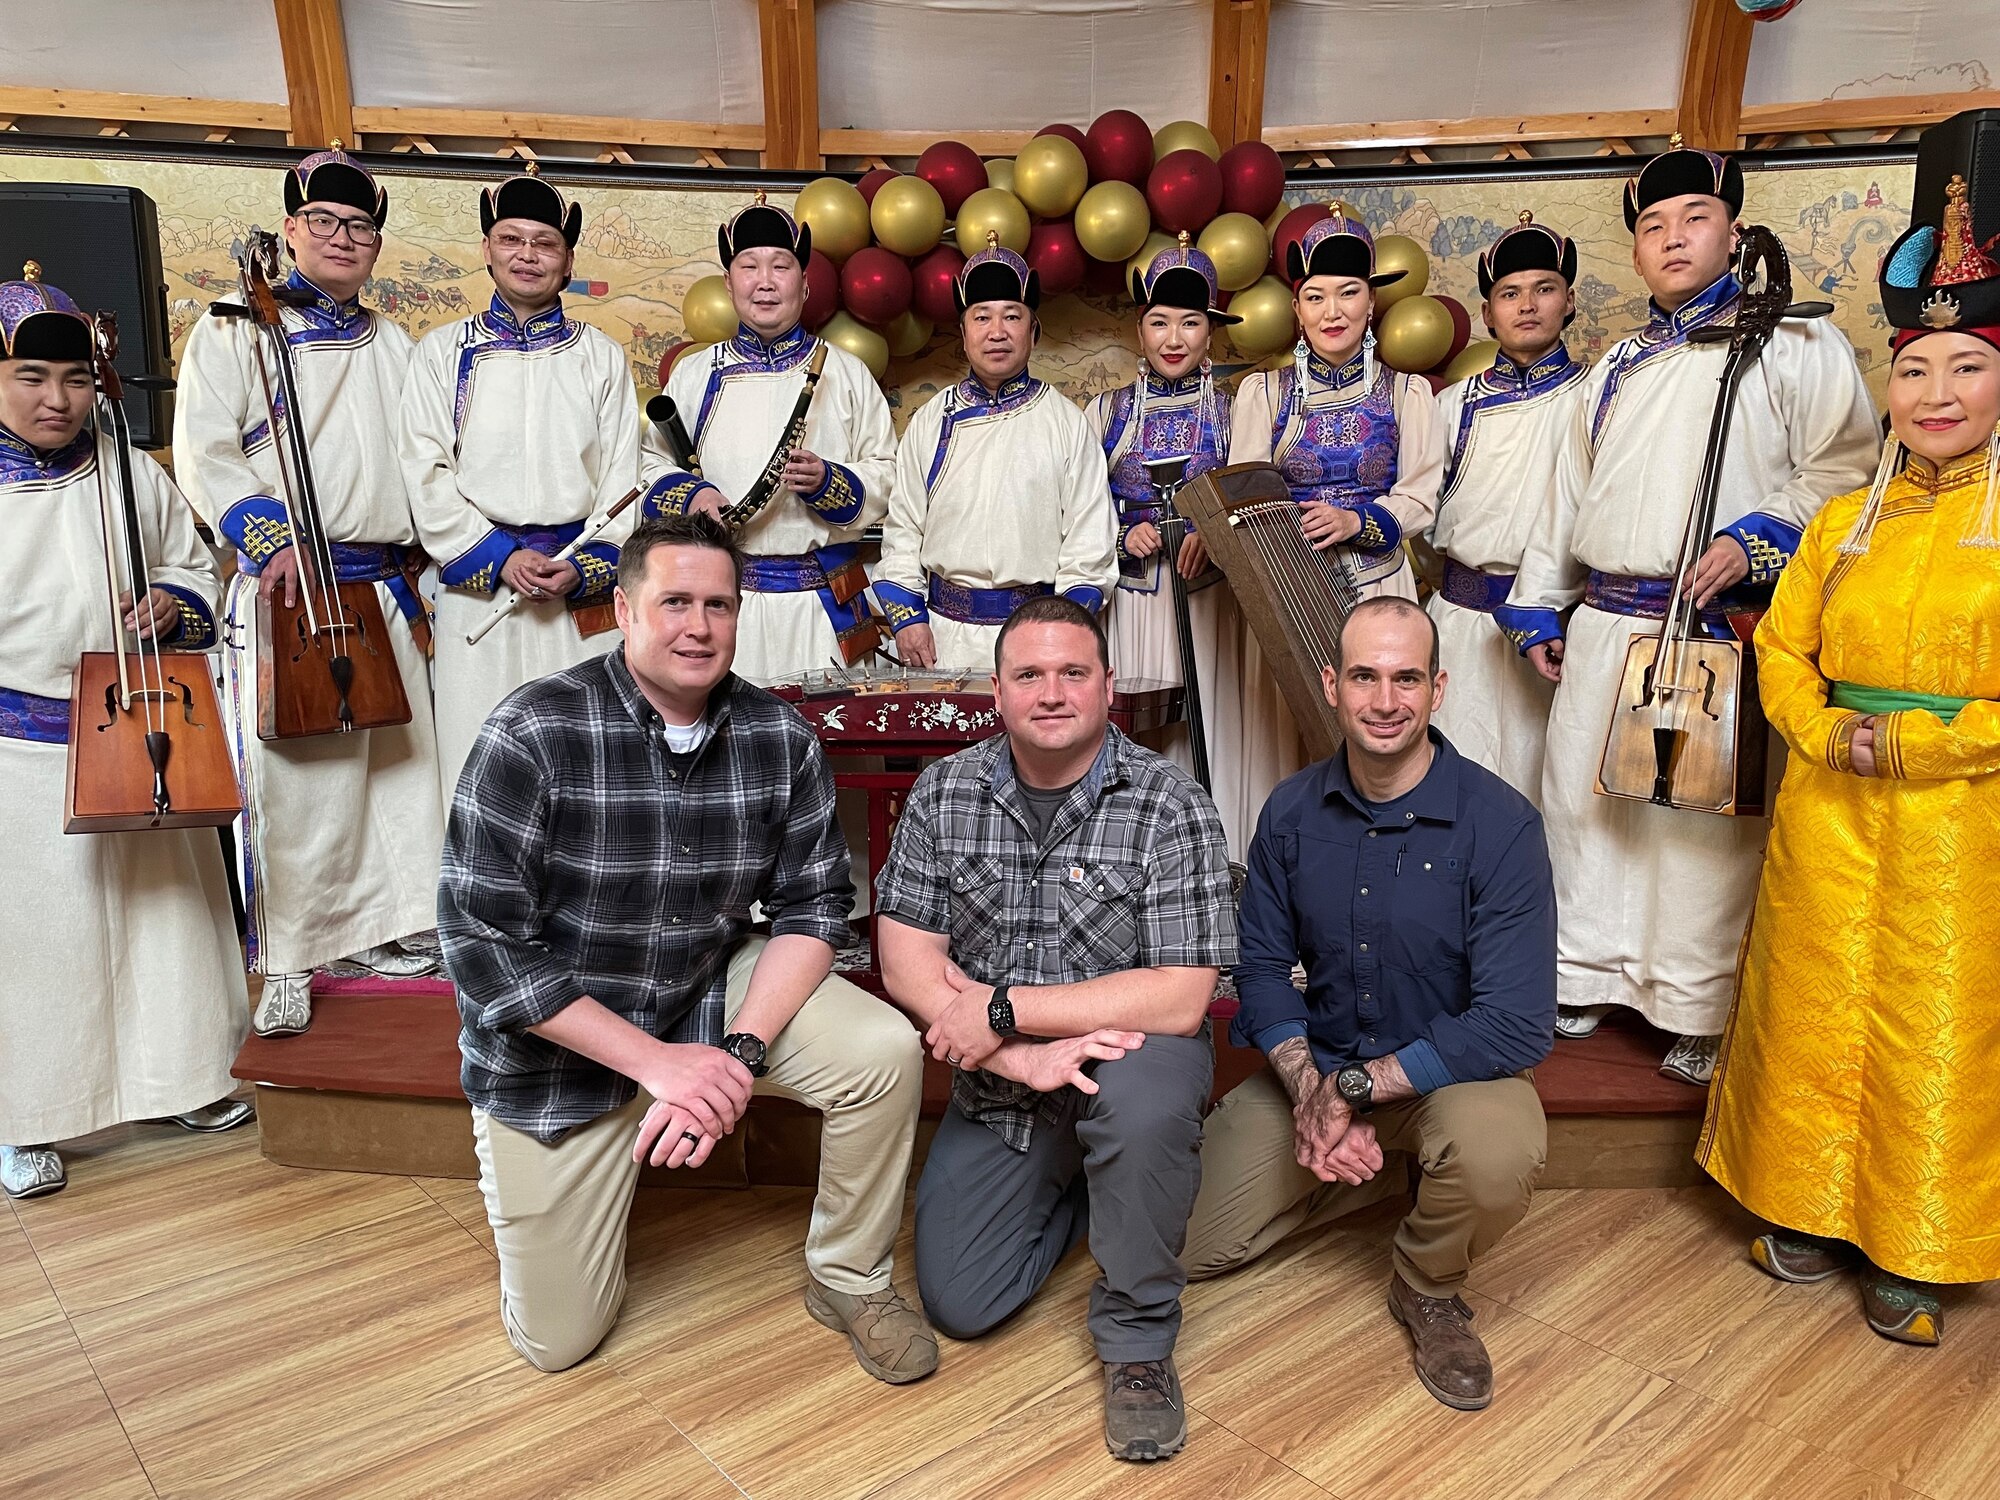 Alaska Air National Guard Chief Master Sgt. Mike Keegan, Lt. Col. Richard Welch, and Maj. Nathan Pooler pose for a photo with musical performers during the cultural day of the 2021 Airman to Airman Talks program in Mongolia Nov. 15-17. A2AT provides an avenue to develop interoperability, foster military-to-military relations and improve bilateral cooperation. The U.S. and partner nation air forces conduct these engagements to plan for upcoming bilateral activities and establish partner goals. This is the second time the Alaska National Guard participated in the A2AT program with Mongolia, hosted by U.S. Pacific Air Forces. (Courtesy photo)